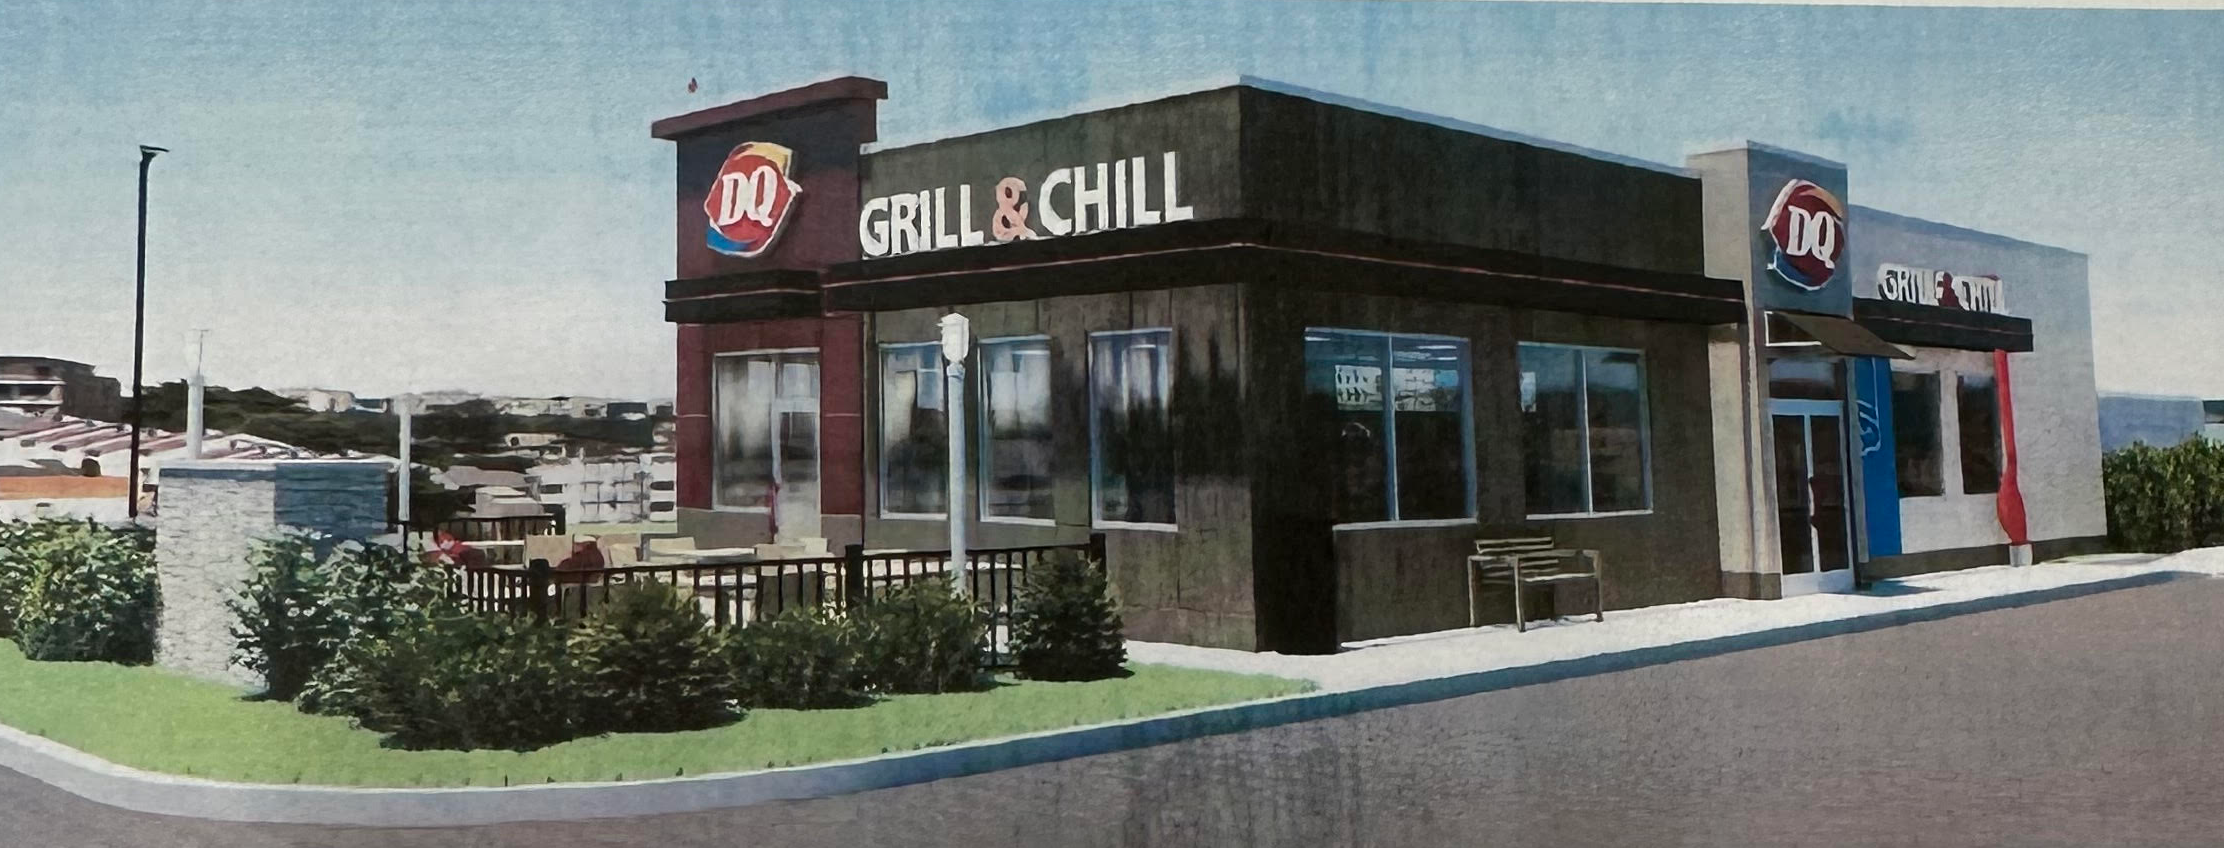 Thumbnail for Dairy Queen’s New Location Will Have Modern Look, More Seating